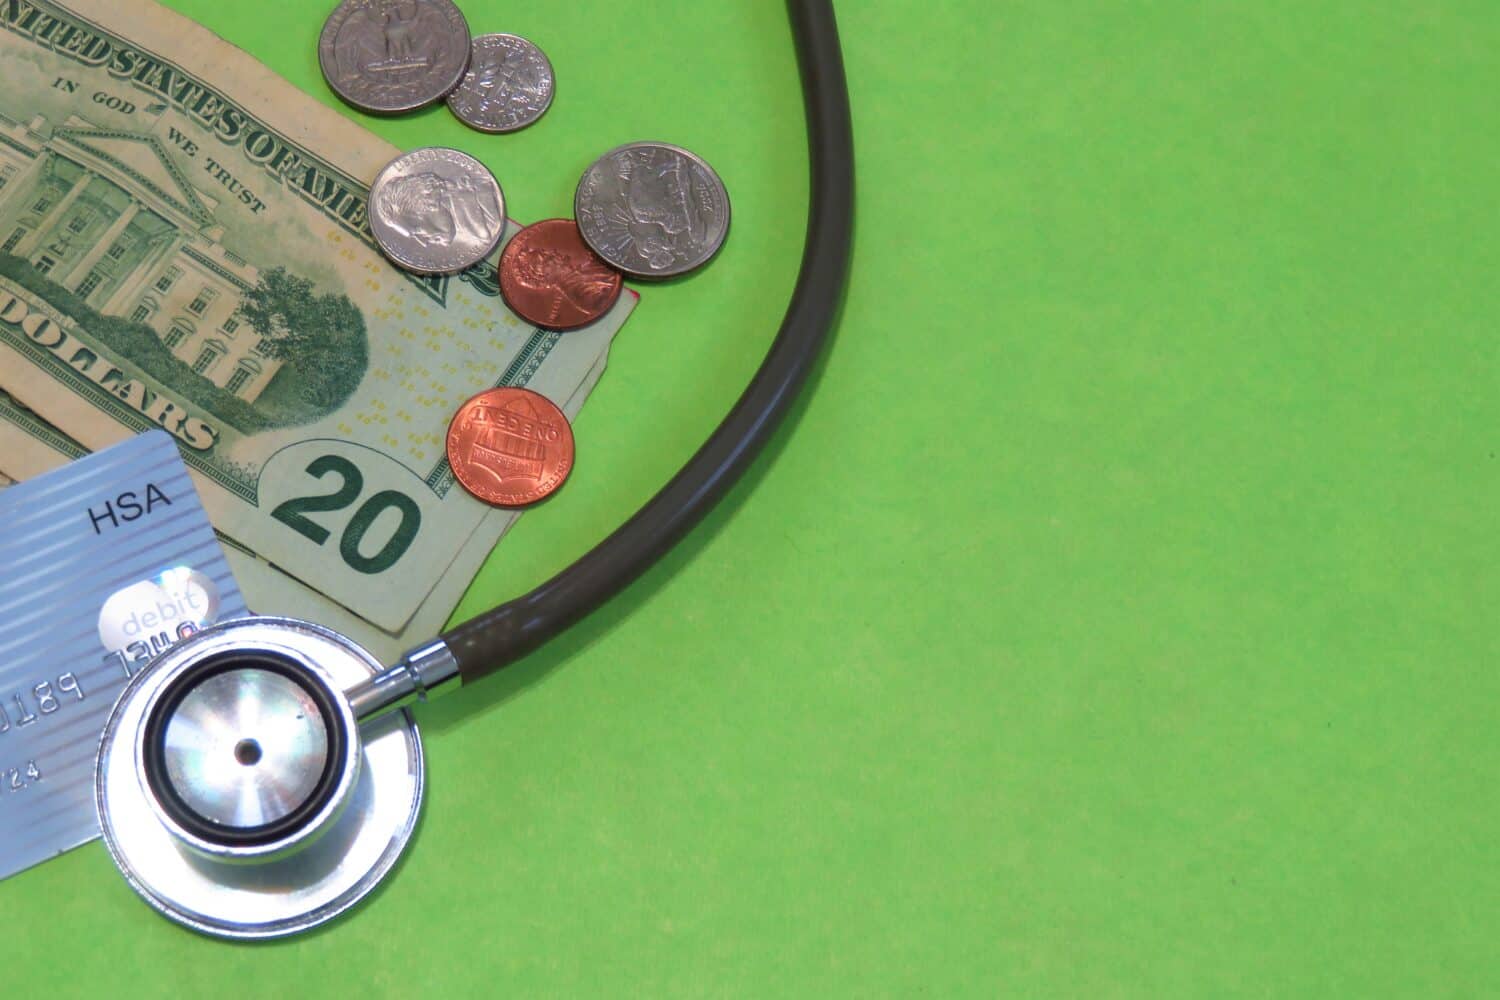 Health Savings Account portrayal: A stethoscope, HSA debit card, and US money on a green background with copy space.